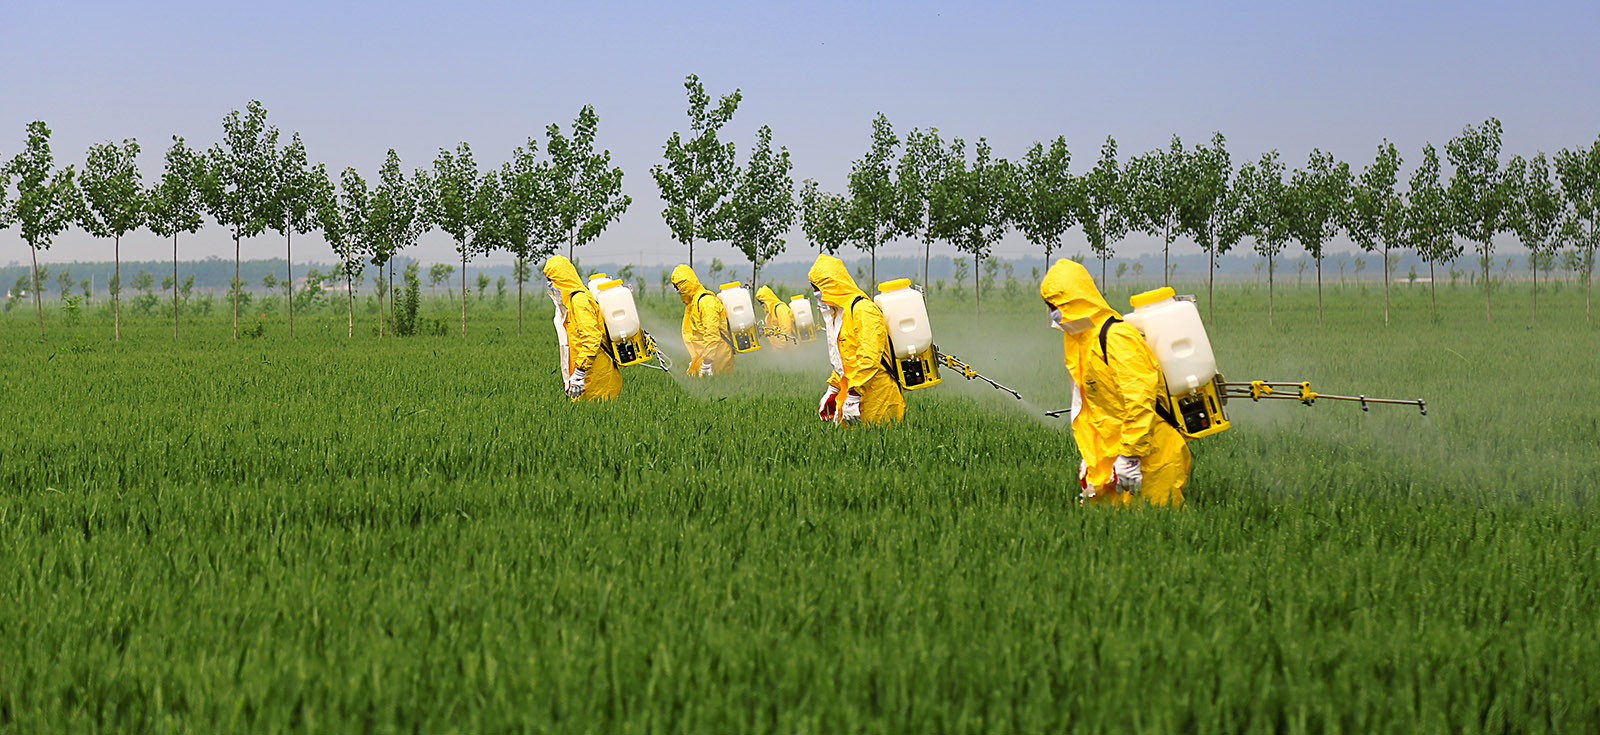 To use pesticides and other agro-chemicals safely, users must first read, understand and comply with the product labels.